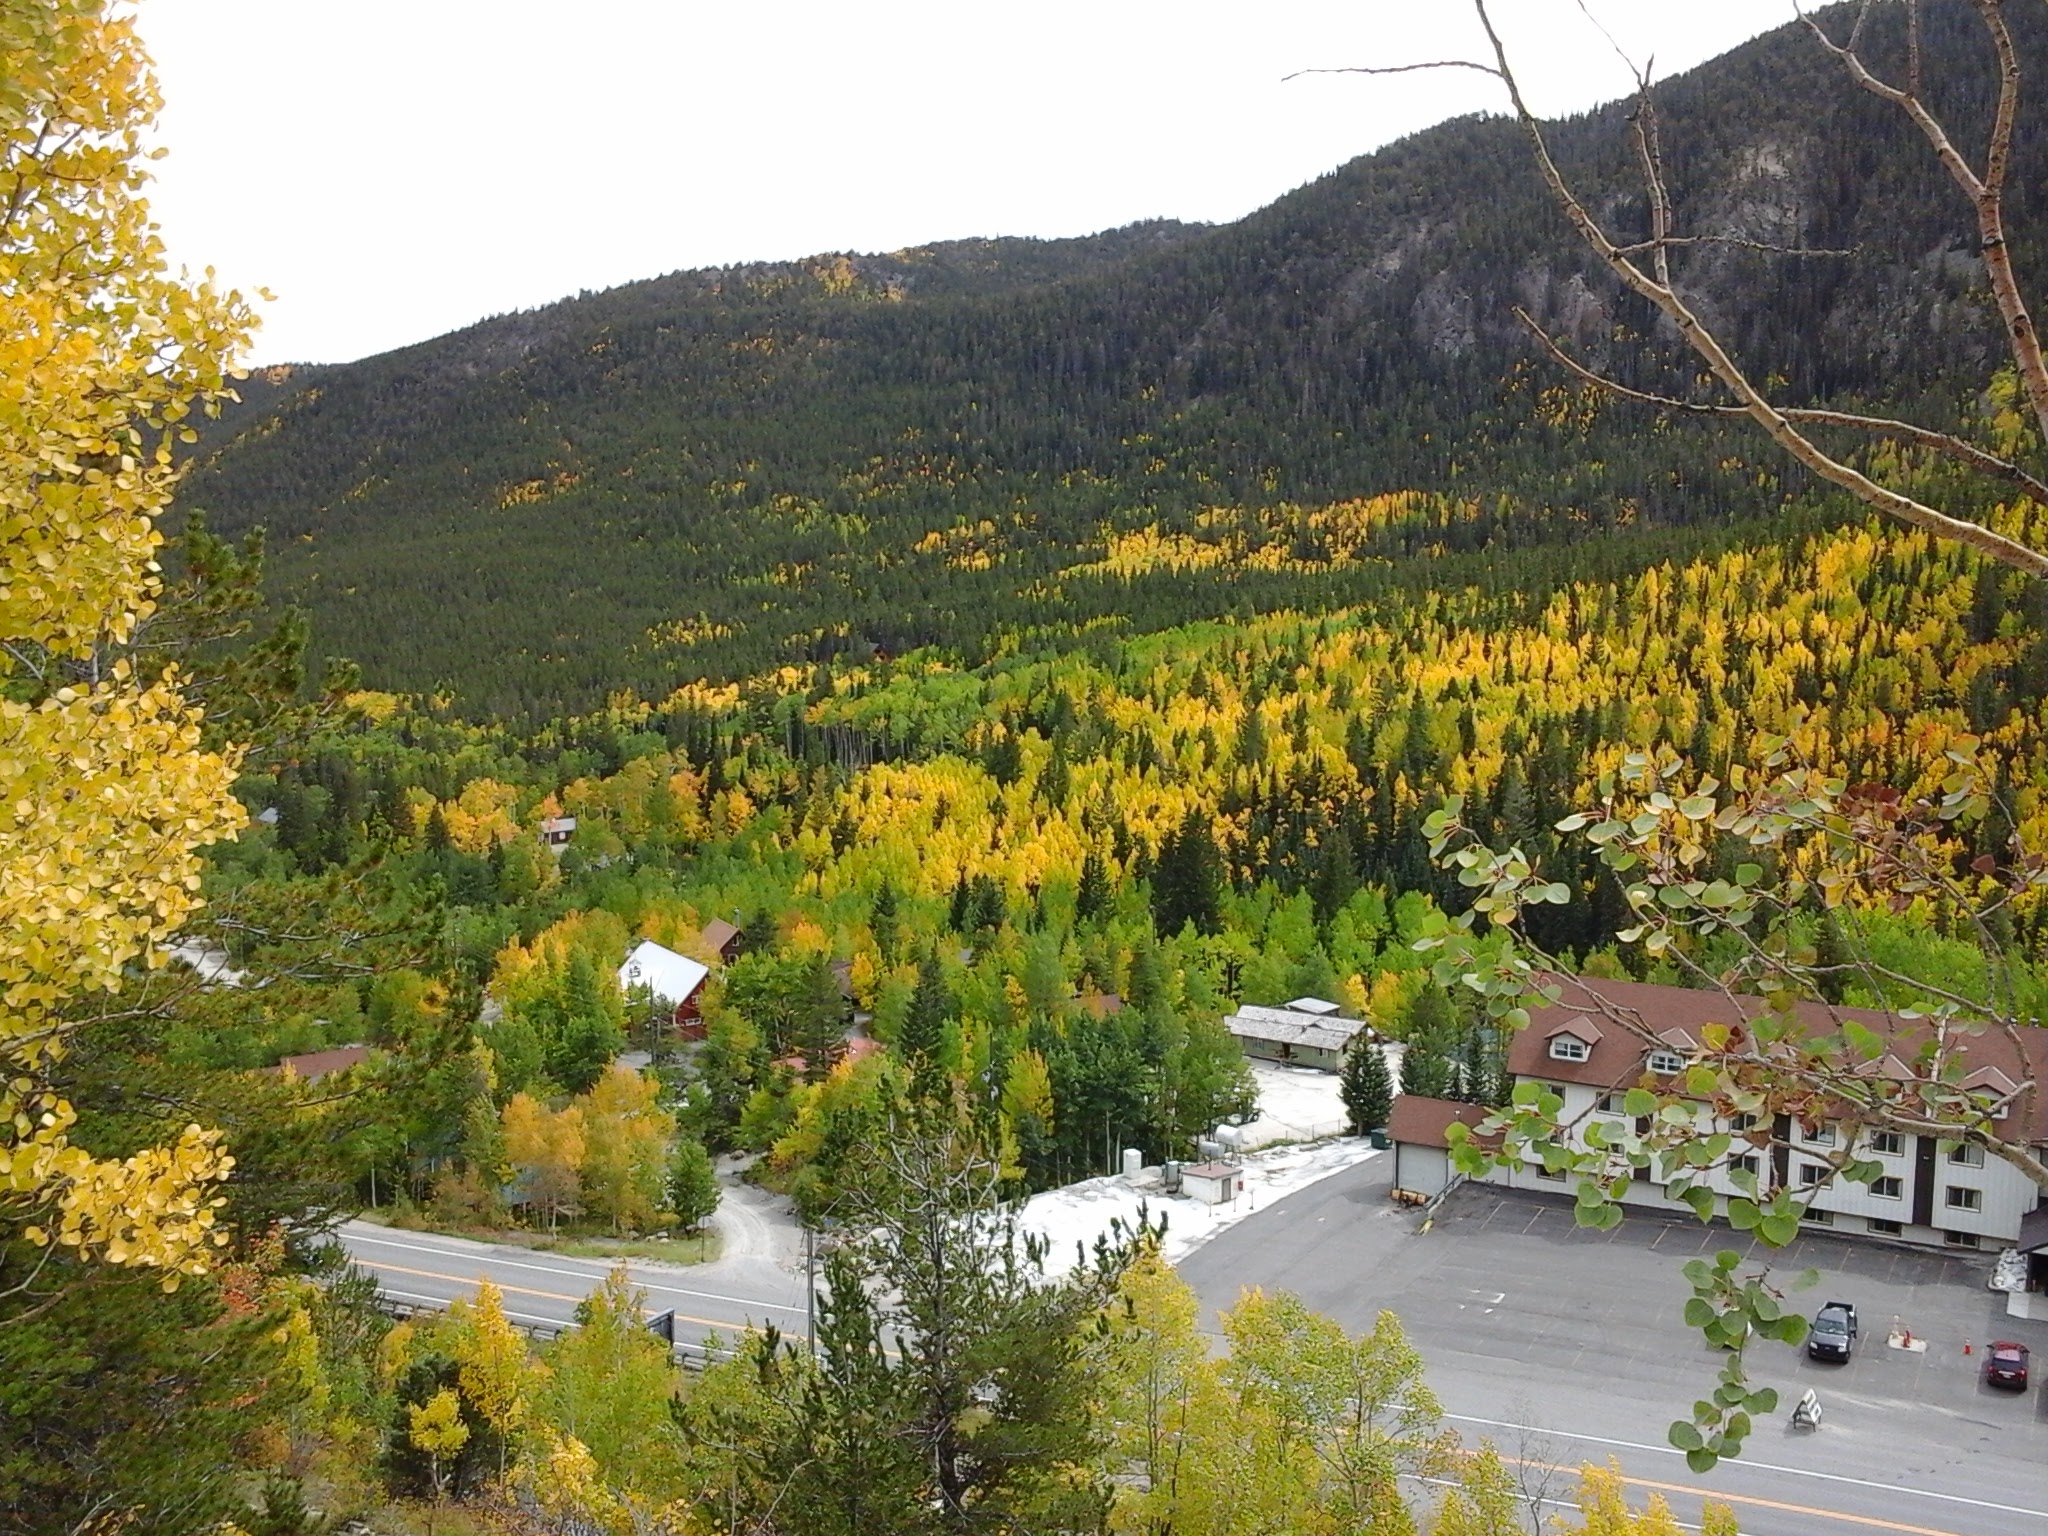 Fall scene above and around a small mountain town with Aspen trees turning golden and yellow colors.